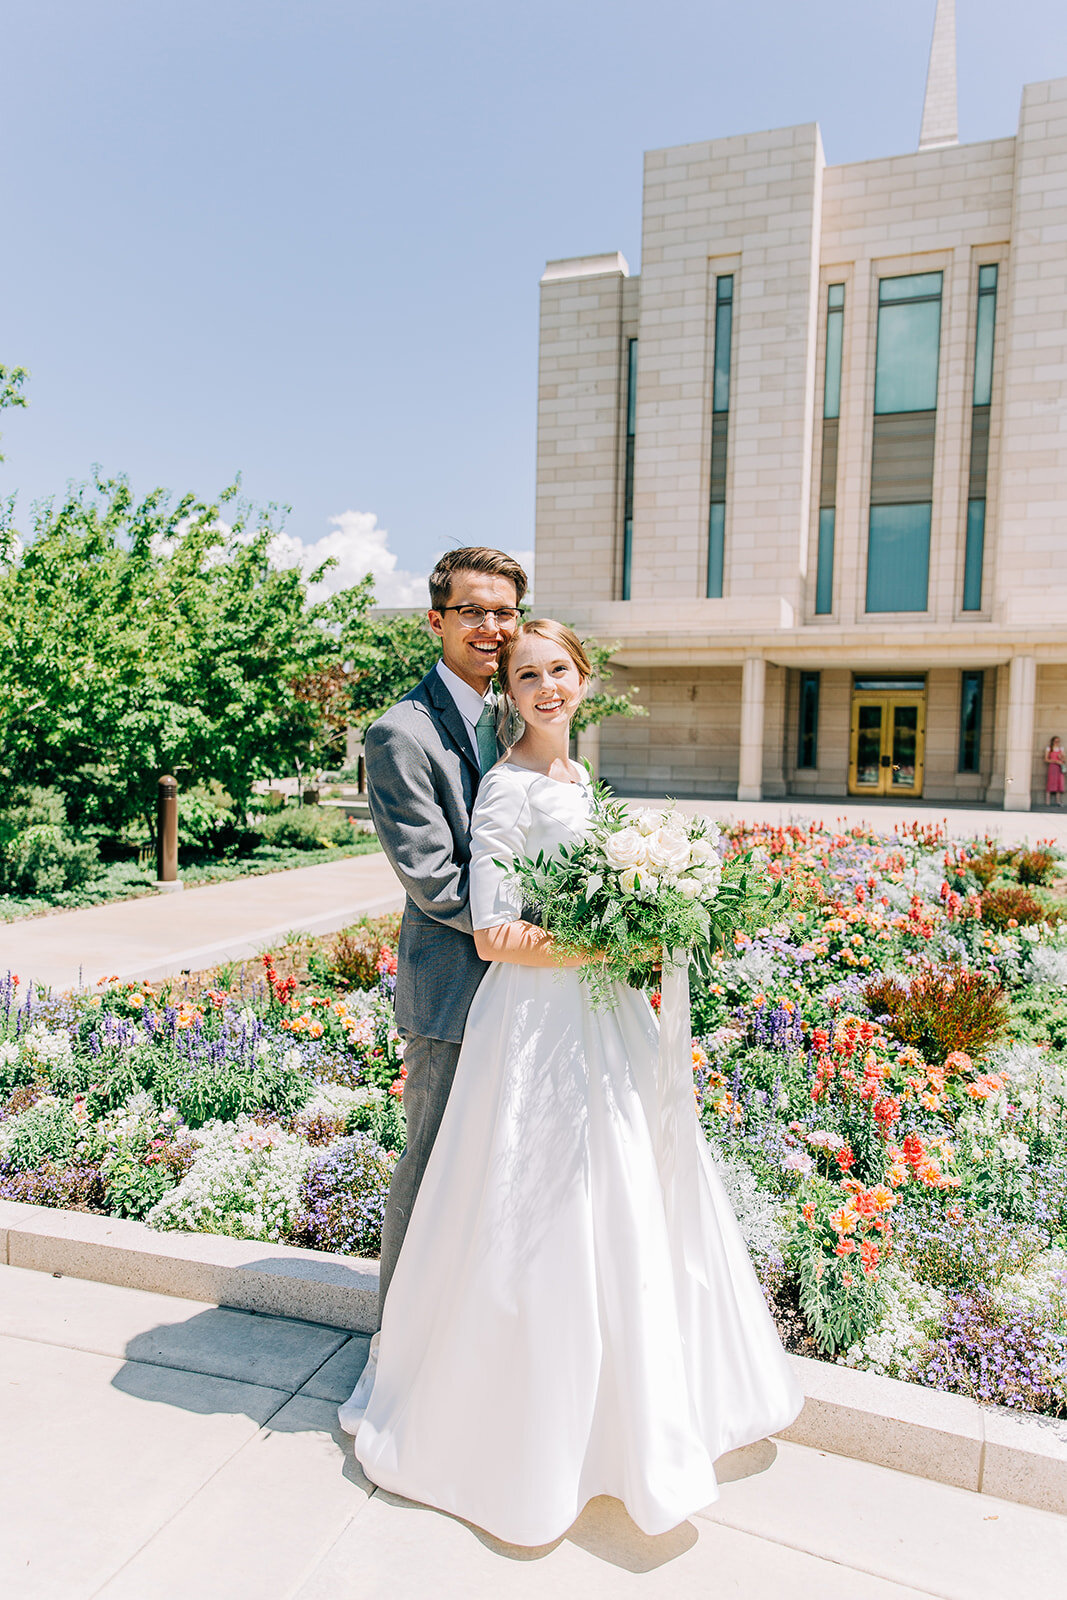  bride and groom picture with the oquirrh mountain temple in the background after lds sealing ceremony summer wedding florals happy couple husband and wife newlyweds after their salt lake city utah wedding affordable wedding photographer bella alder 